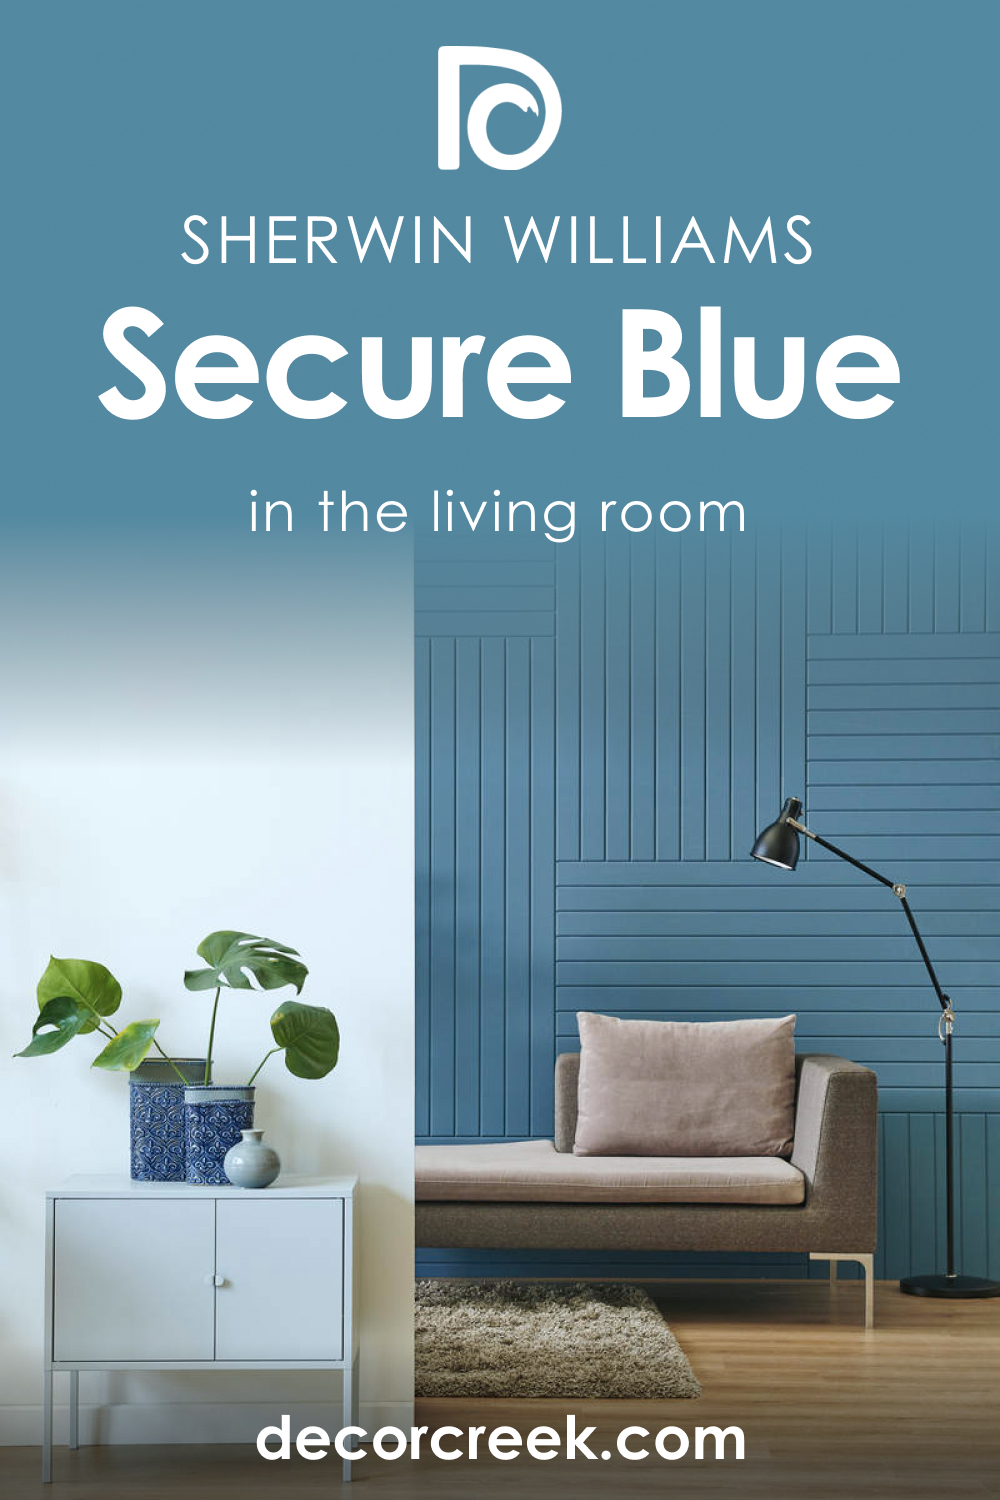 How to Use Secure Blue SW 6508 in the Living Room?